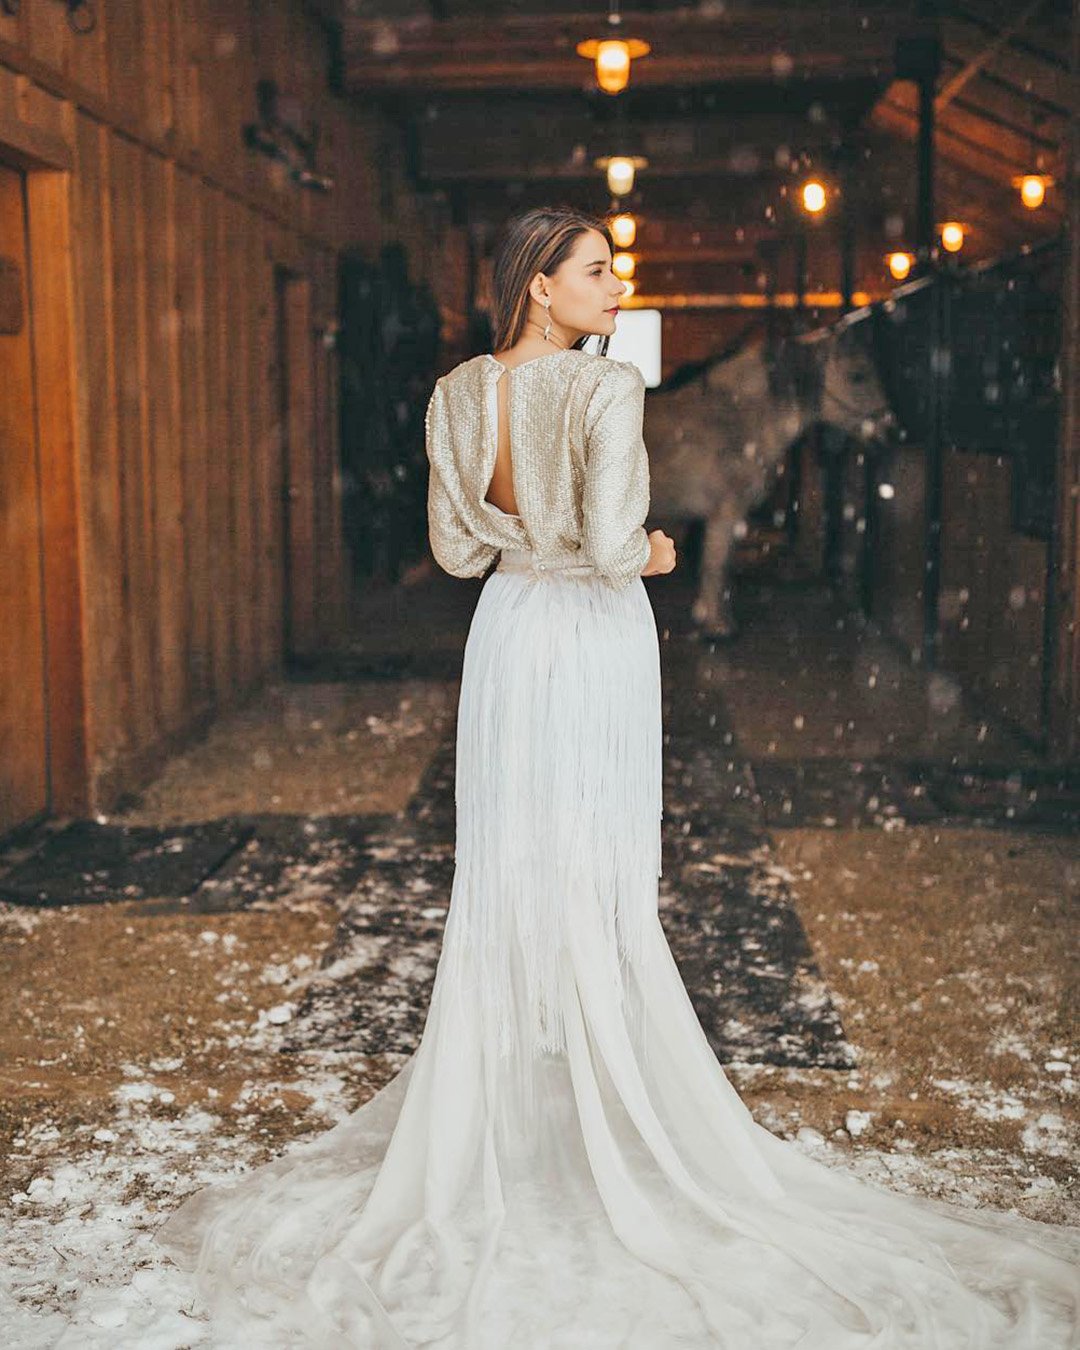 winter wedding dresses outfits sheath with sequins coat madiwagnerphotography